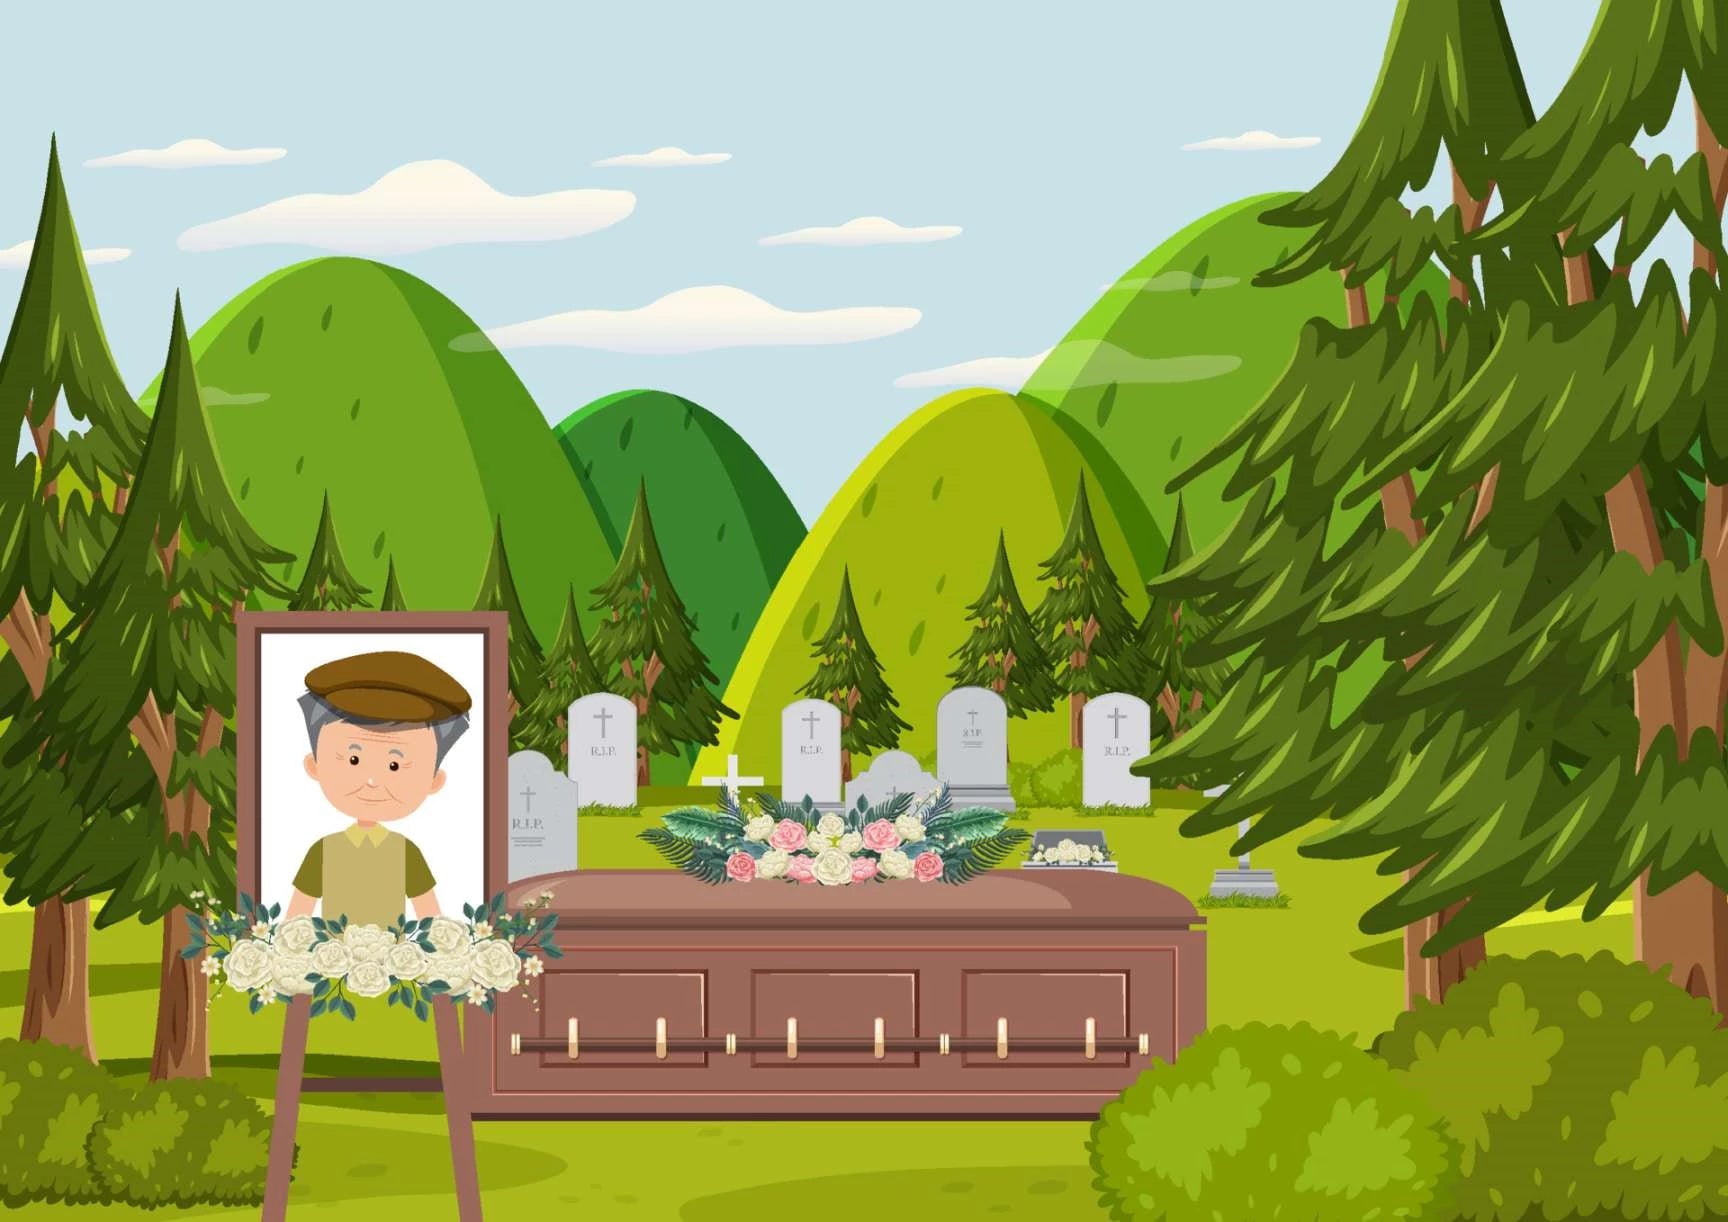 Can You Buy Your Own Coffin For Burial Or Cremation?